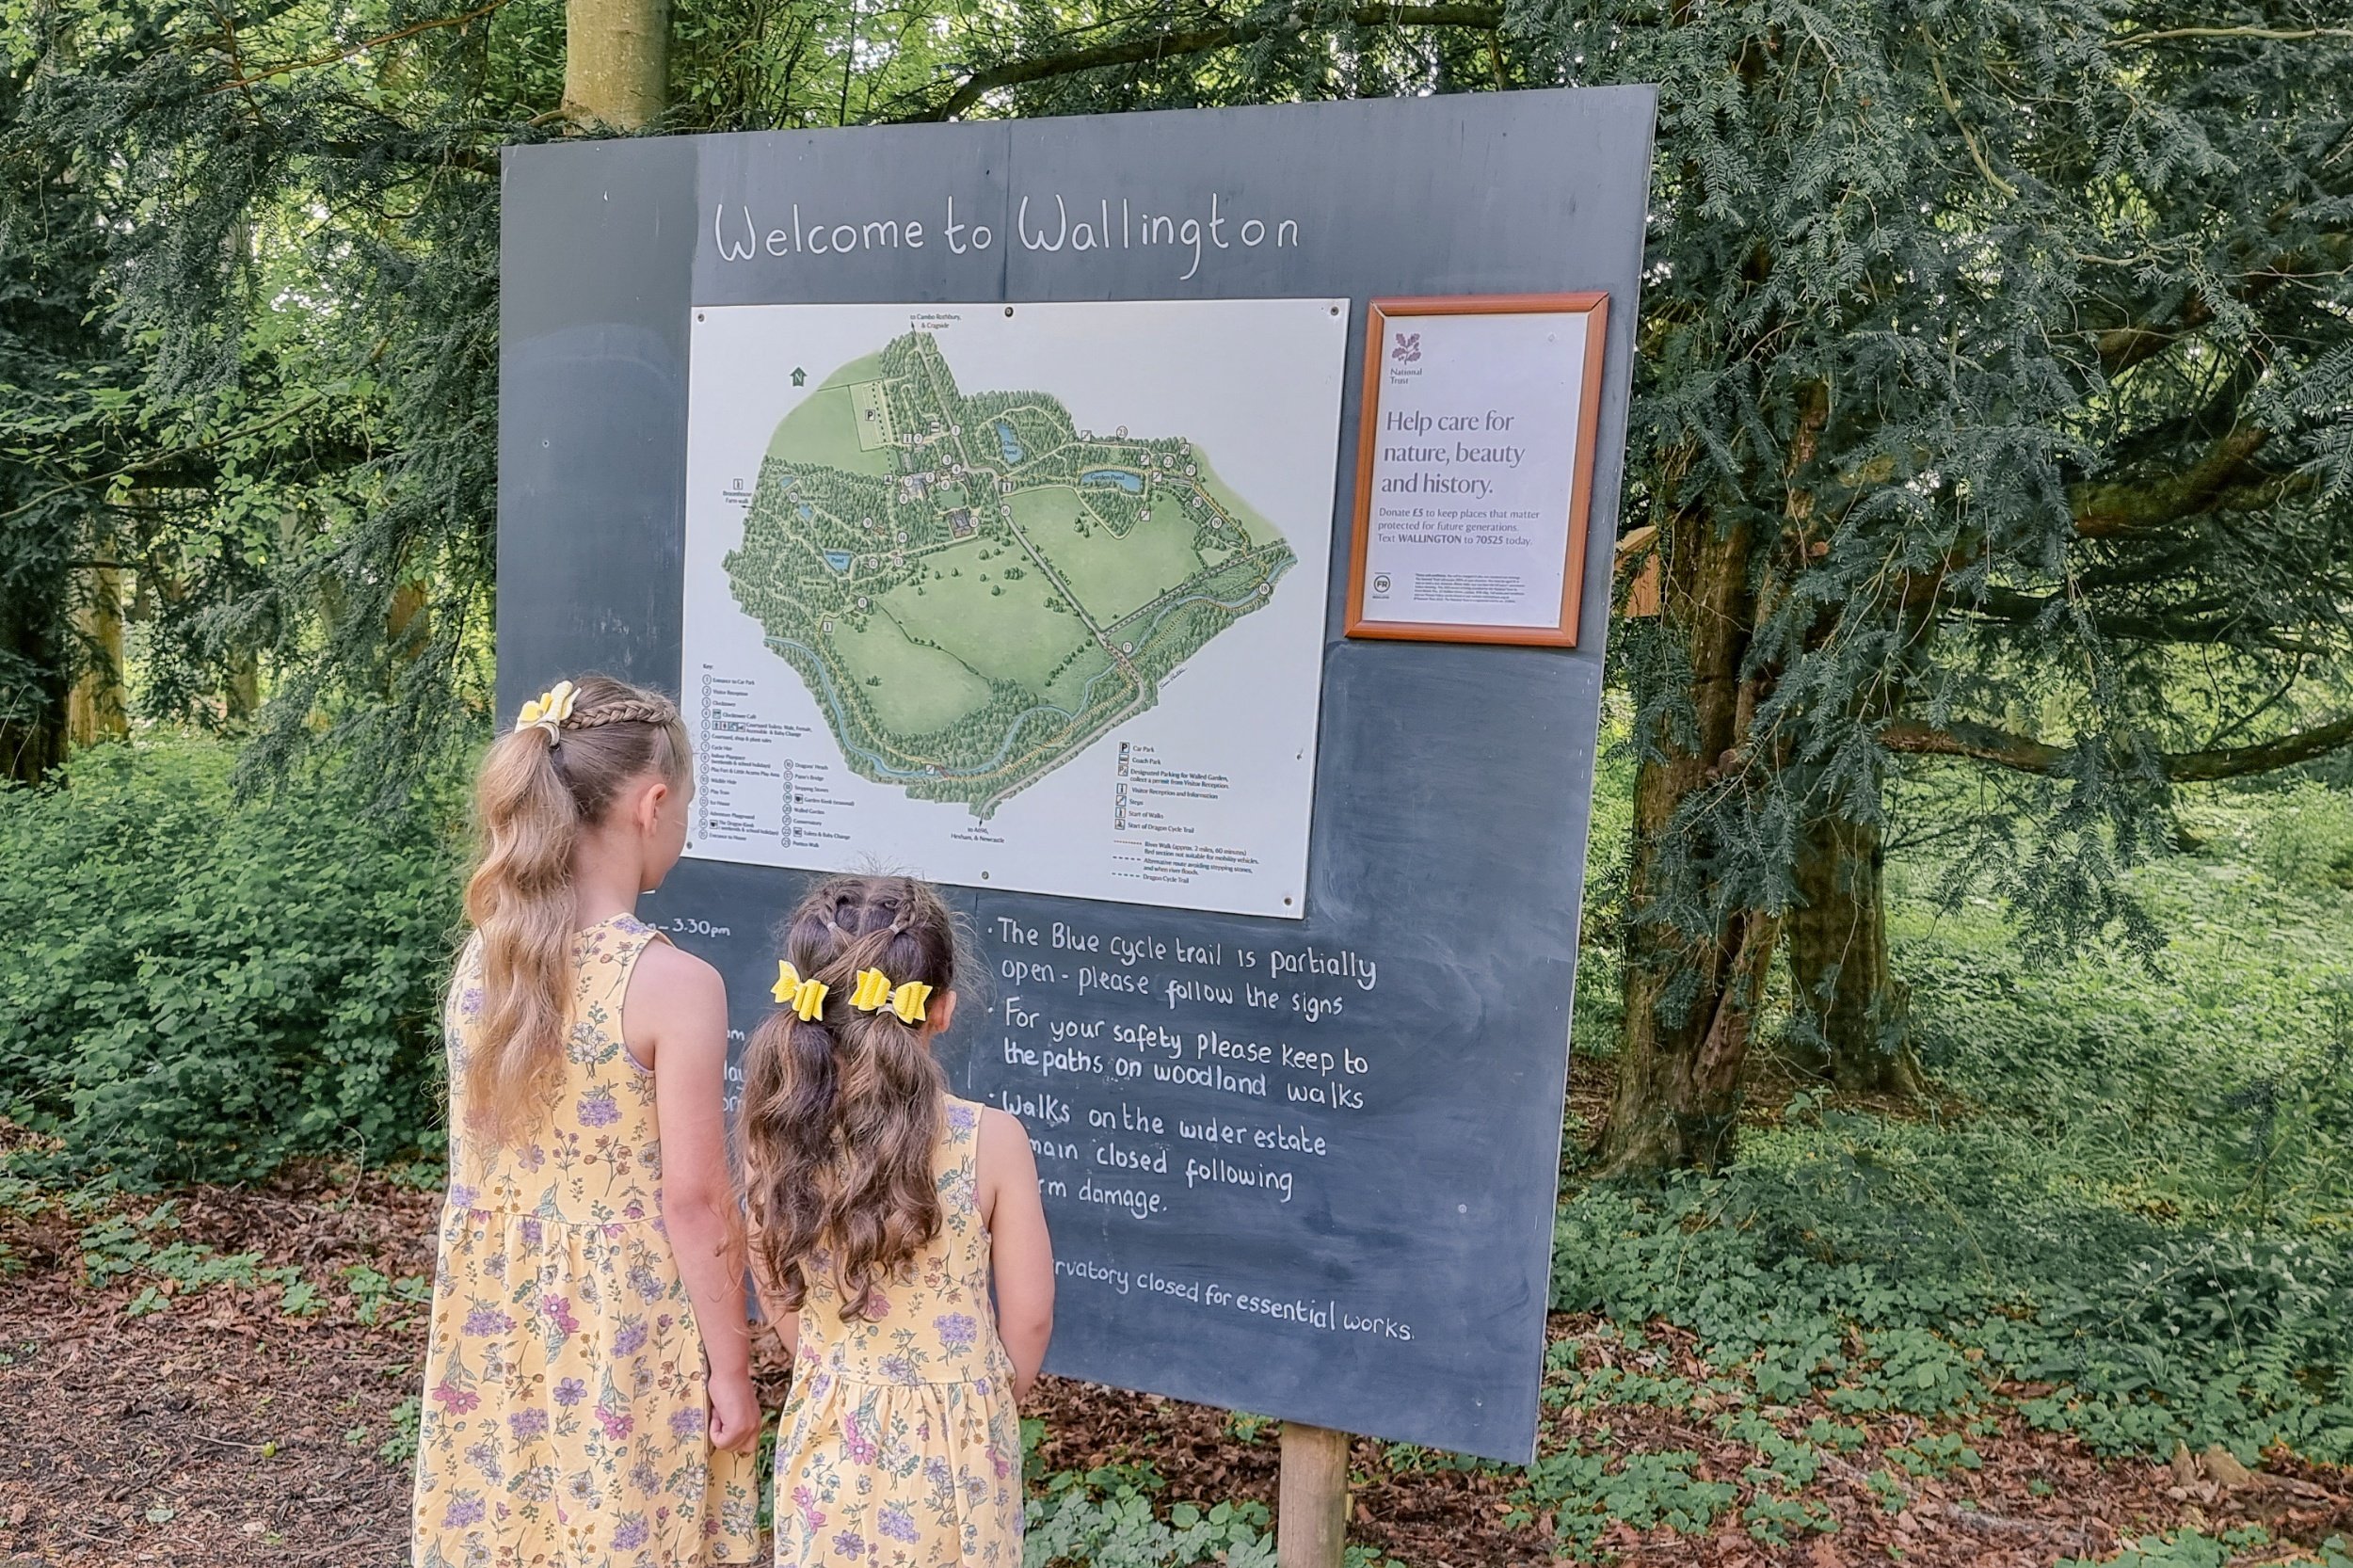 Squidgy and Pickle are in matching yellow floral dresses, and have yellow bows in their hair. They are facing away from the camera looking at a blackboard with the Wallington map on it.